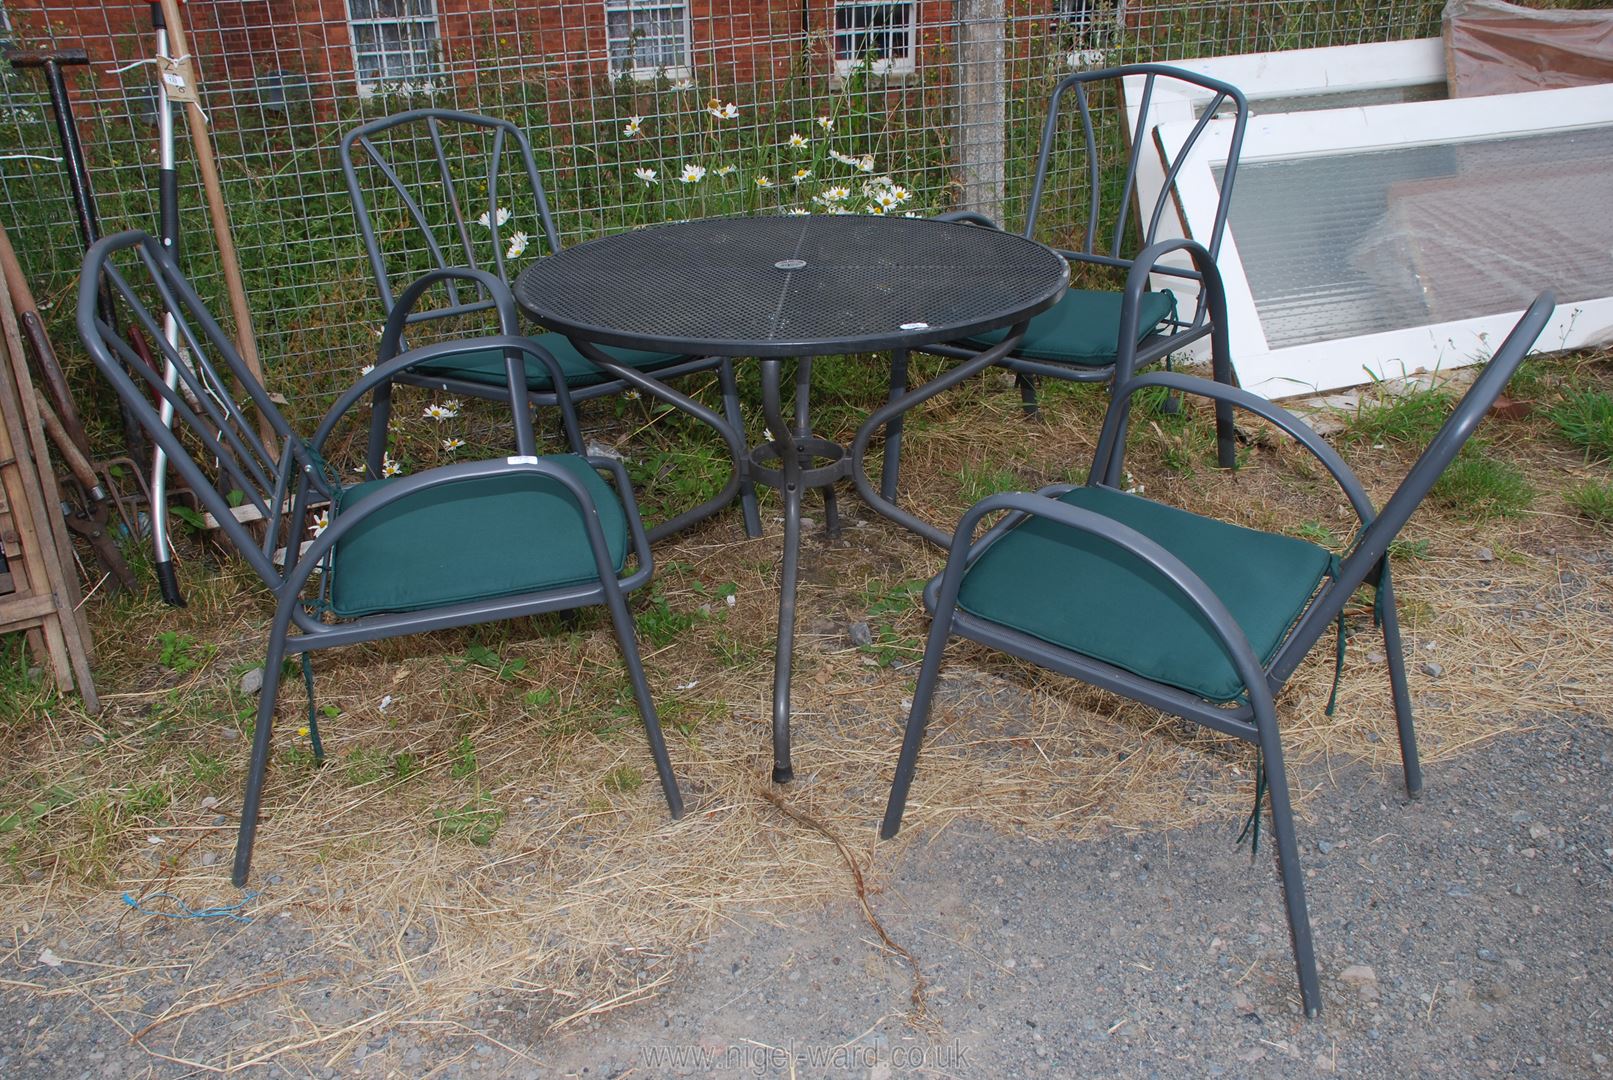 A metal garden table and four chairs with green cushions approx. 35 1/2" (d) x 28".